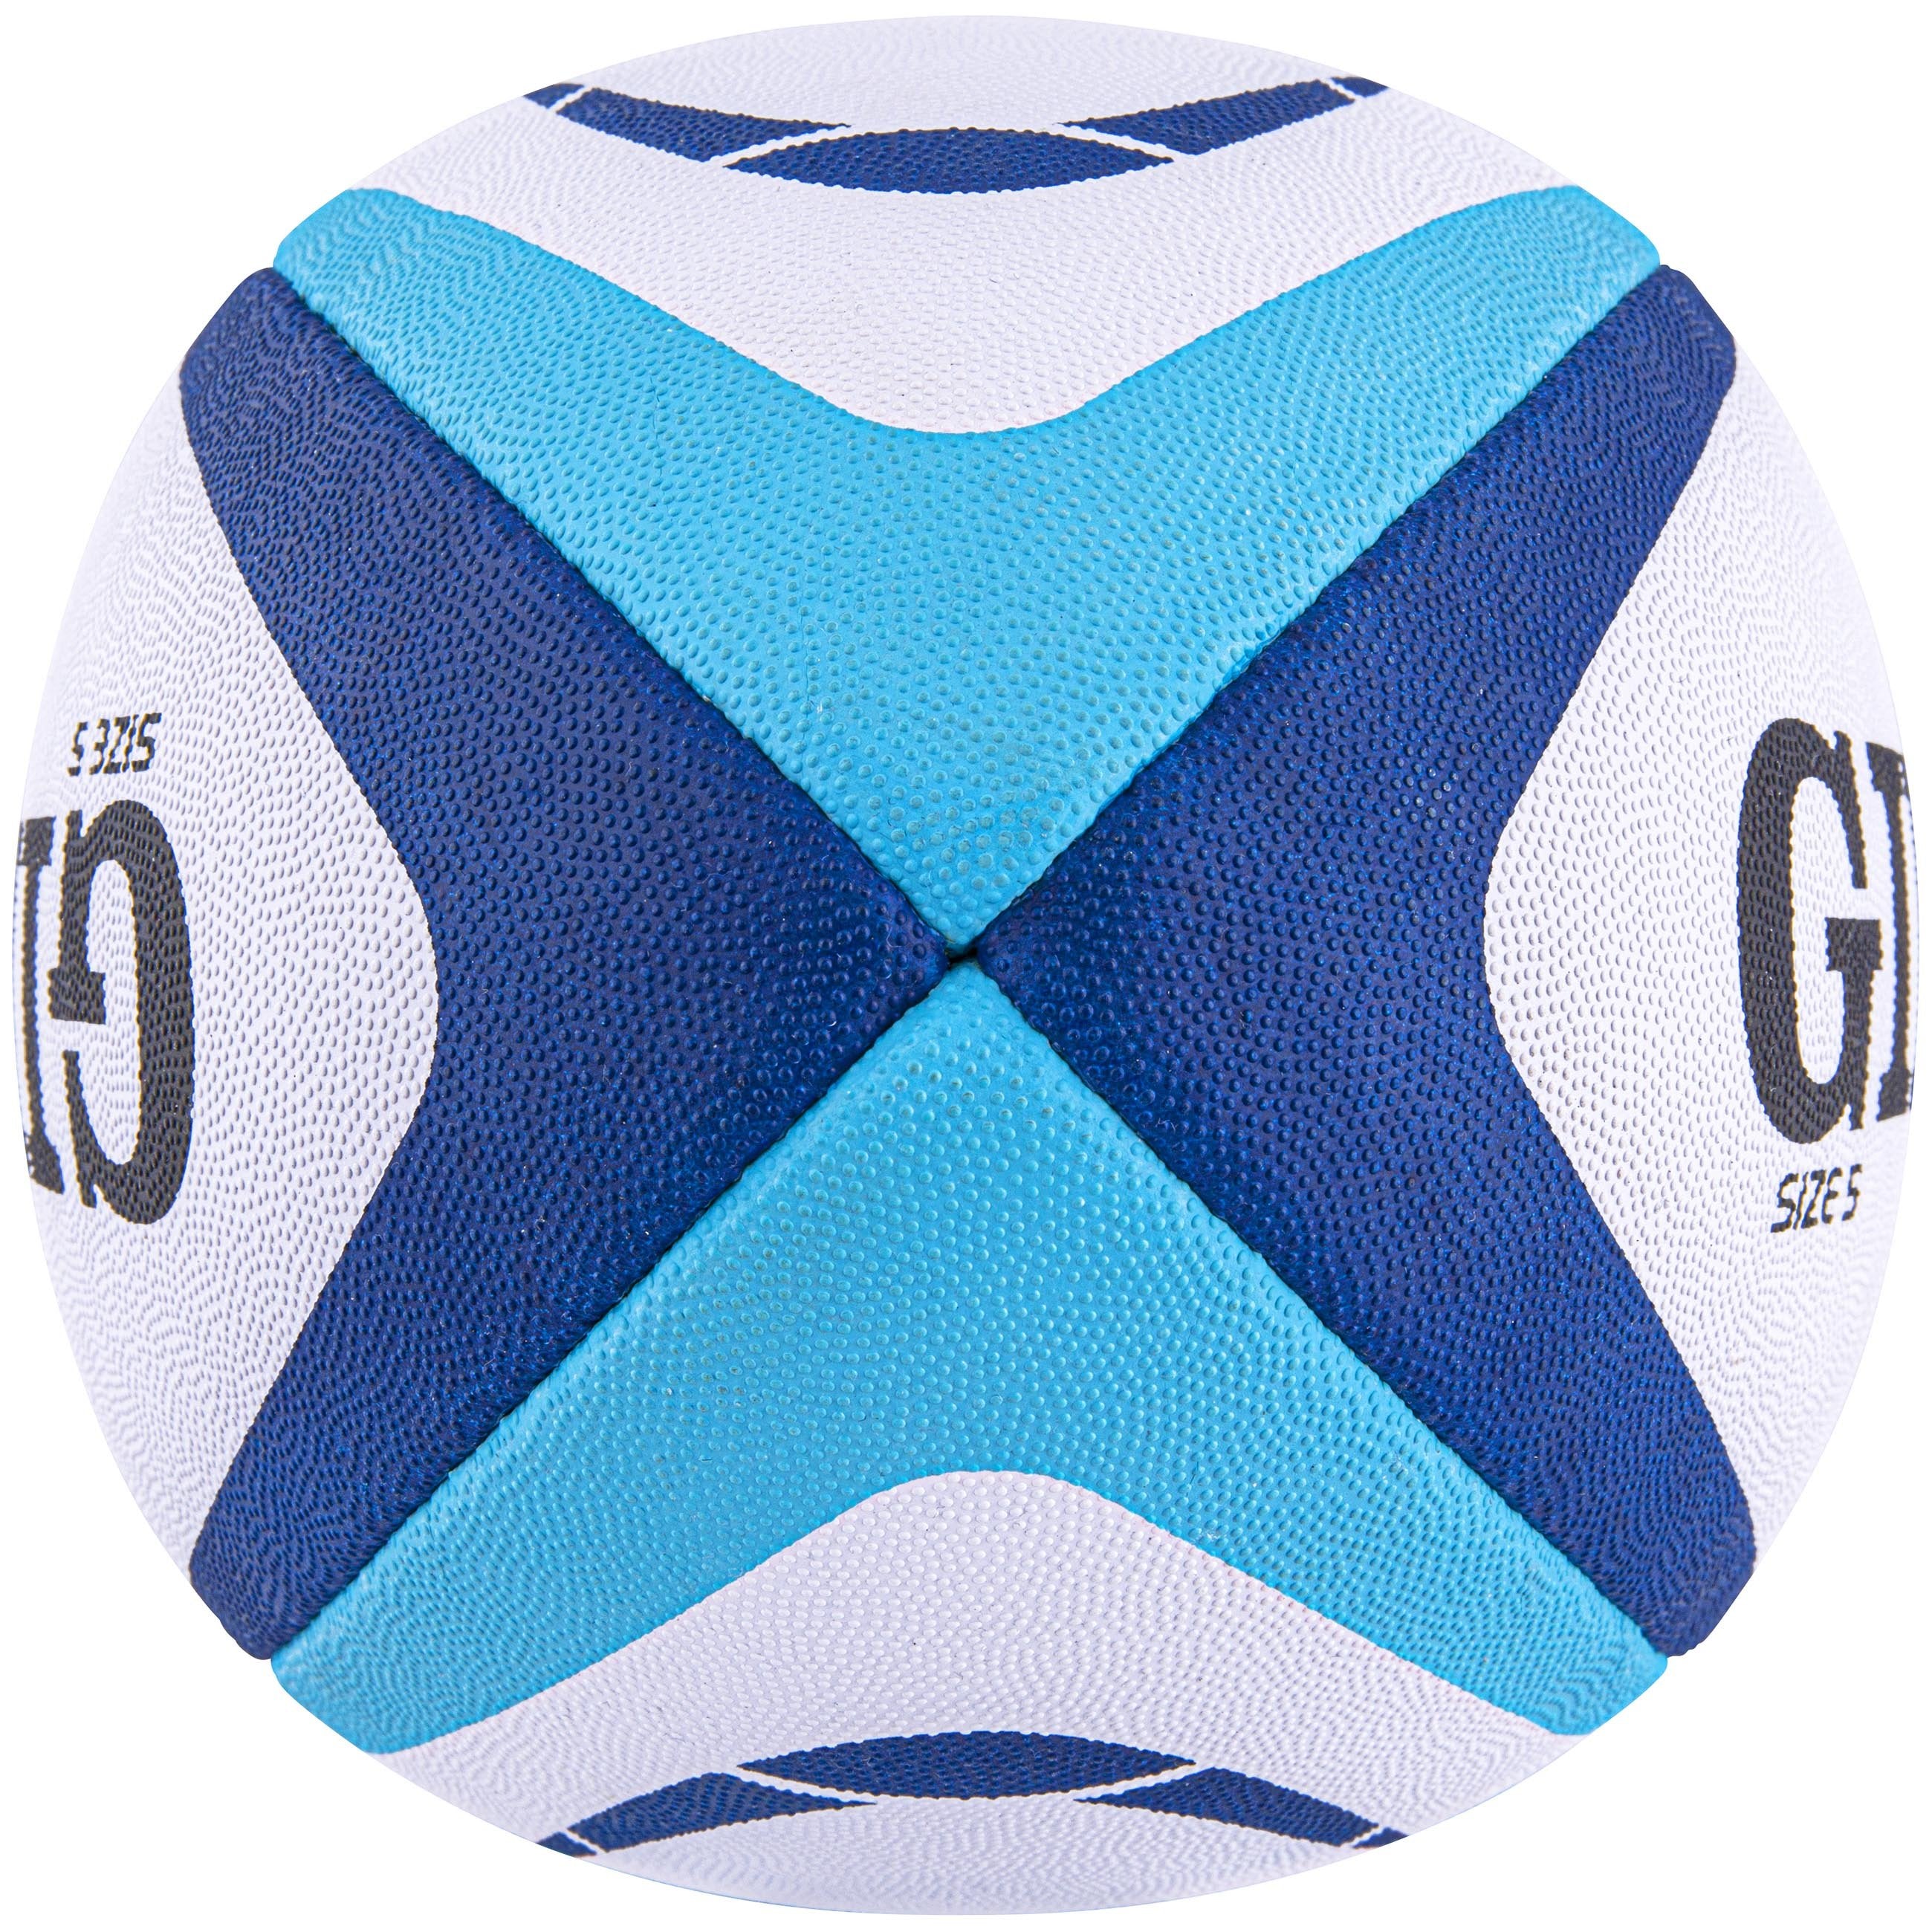 2600 RBAD20 48428305 Ball Match Atom Blue Size 5, End